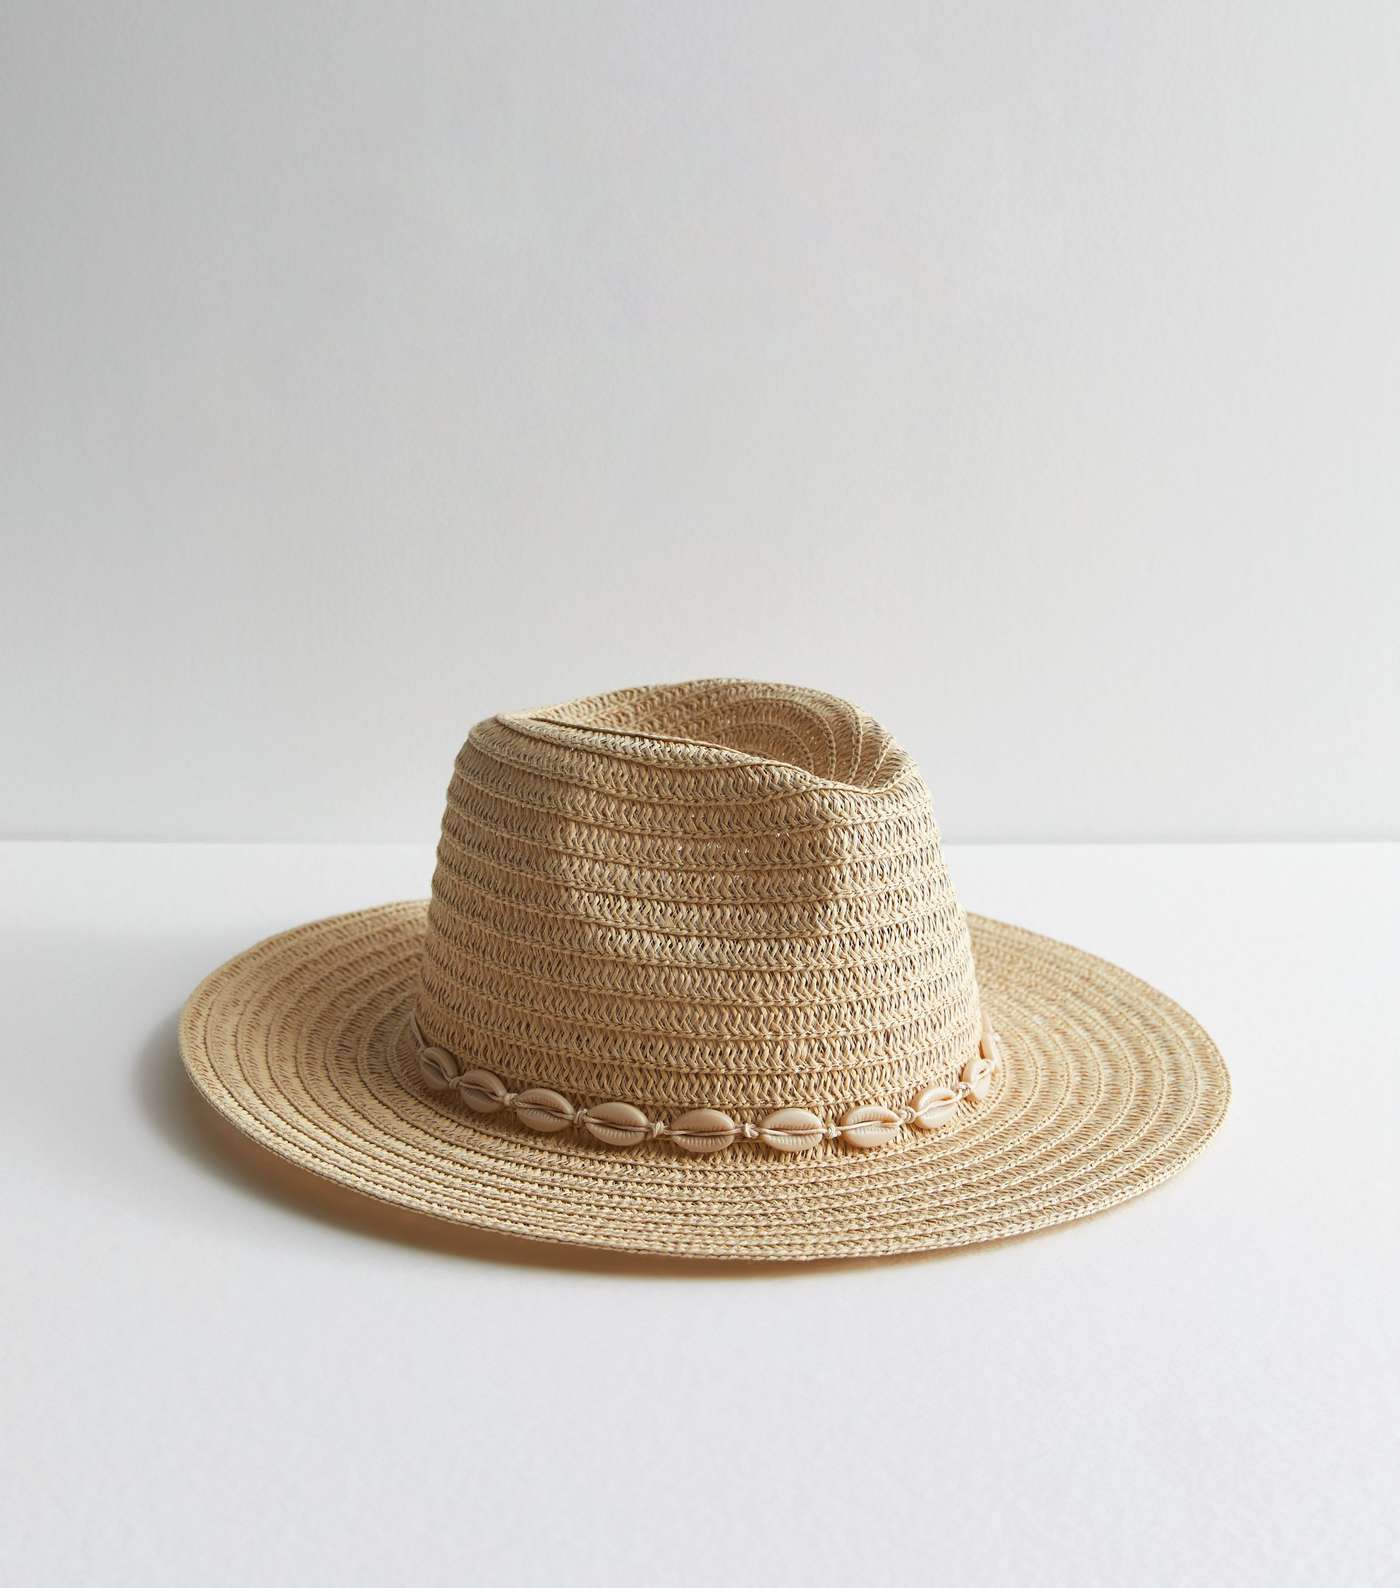 Stone Straw Effect Shell Trim Packable Fedora Hat Image 2